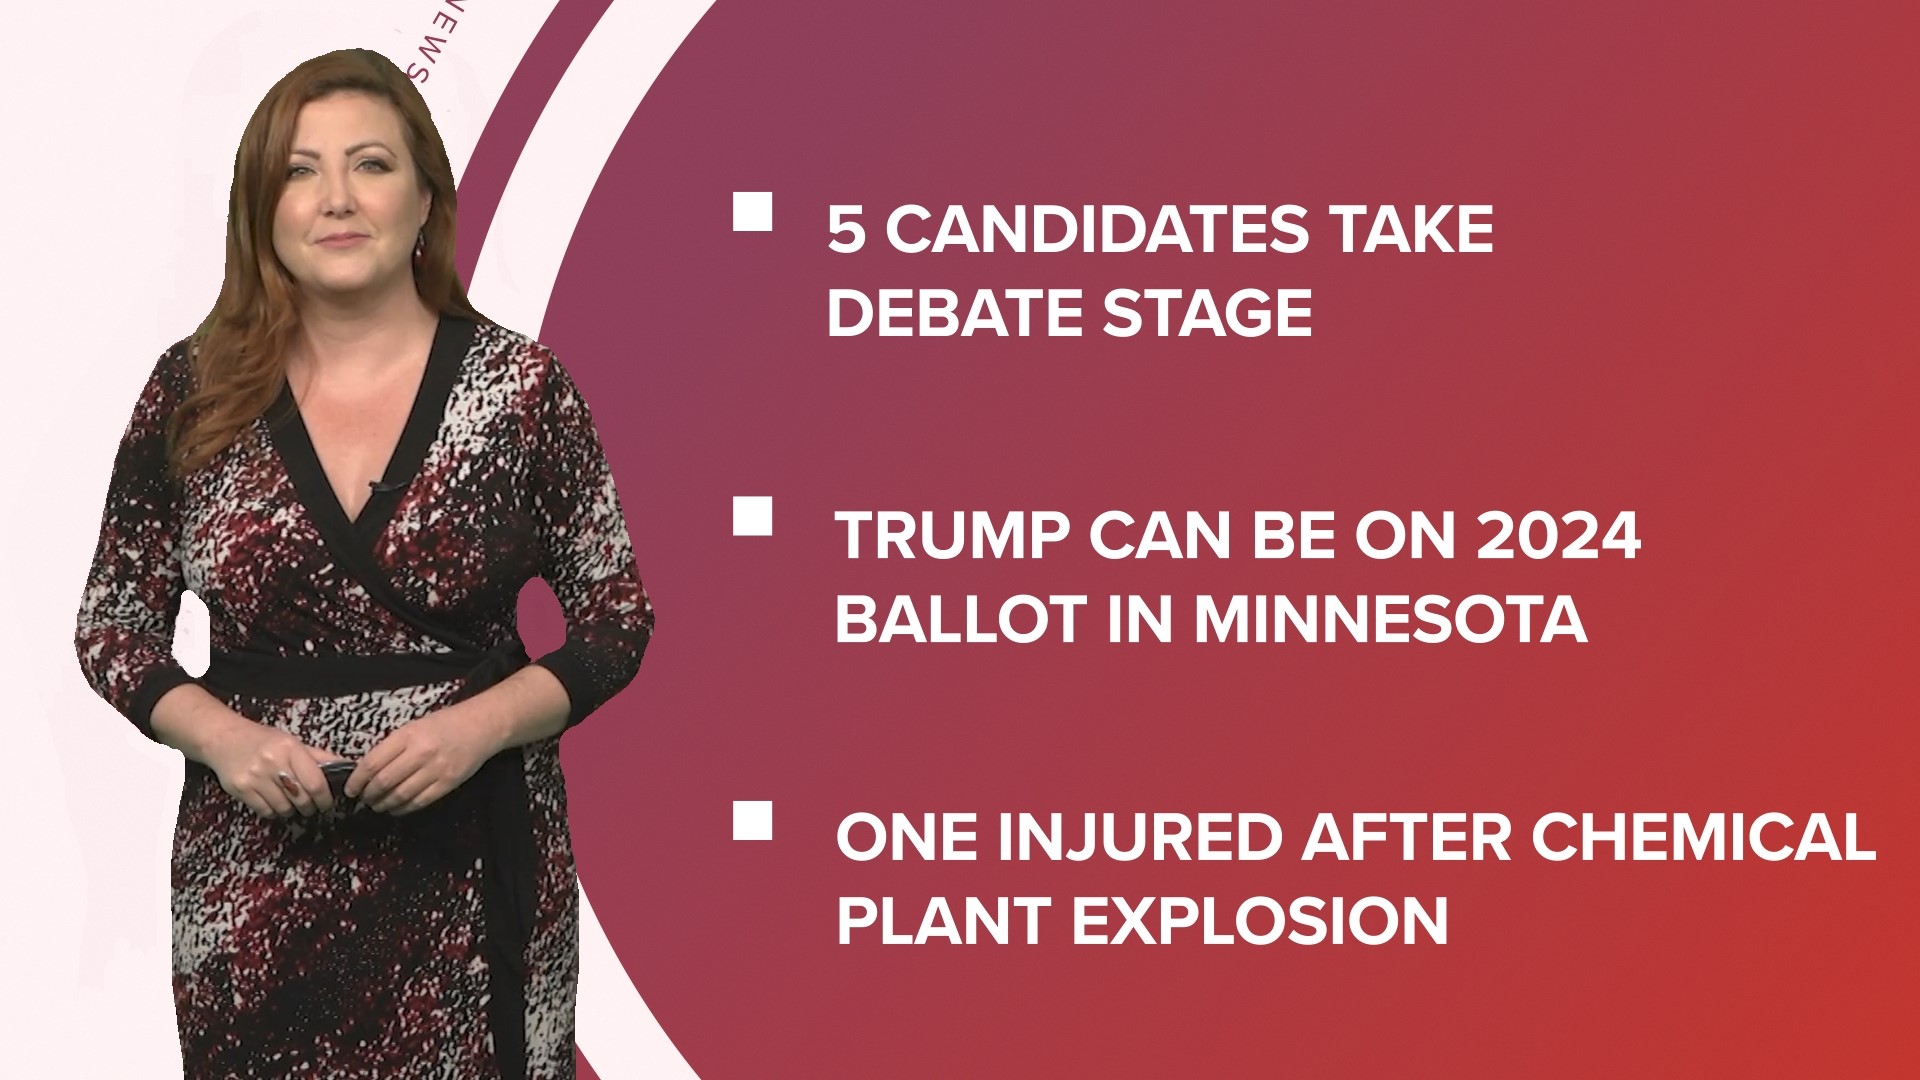 A look at what is happening in the news from 5 Republican candidates take the debate stage to a ruling on putting Trump on the 2024 primary ballot in Minnesota.